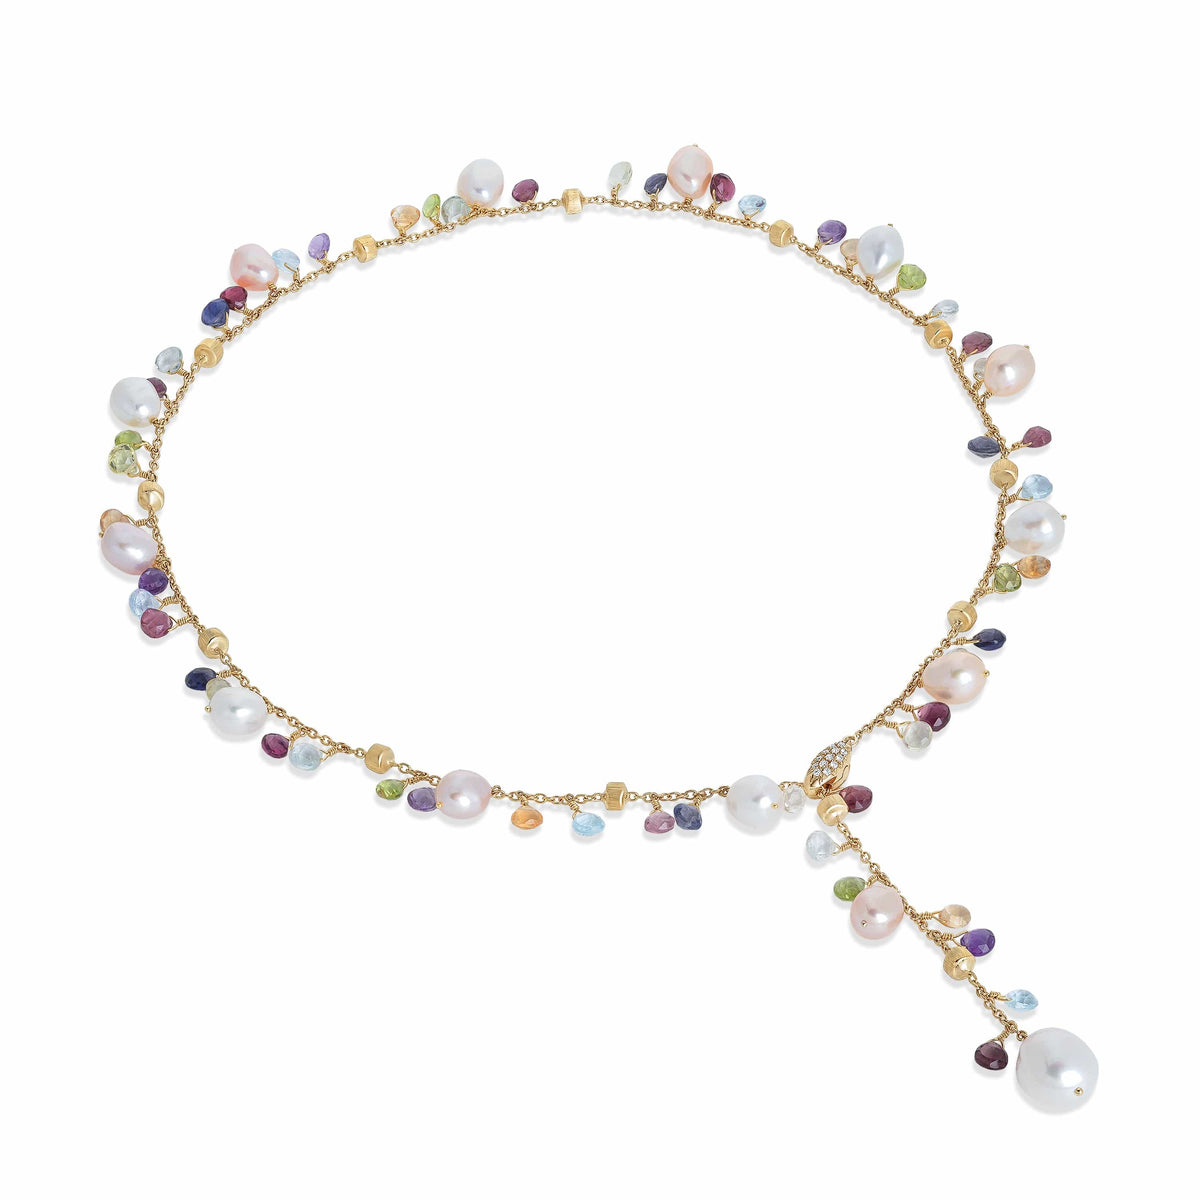 Mixed Gemstone and Pearl Lariat Necklace